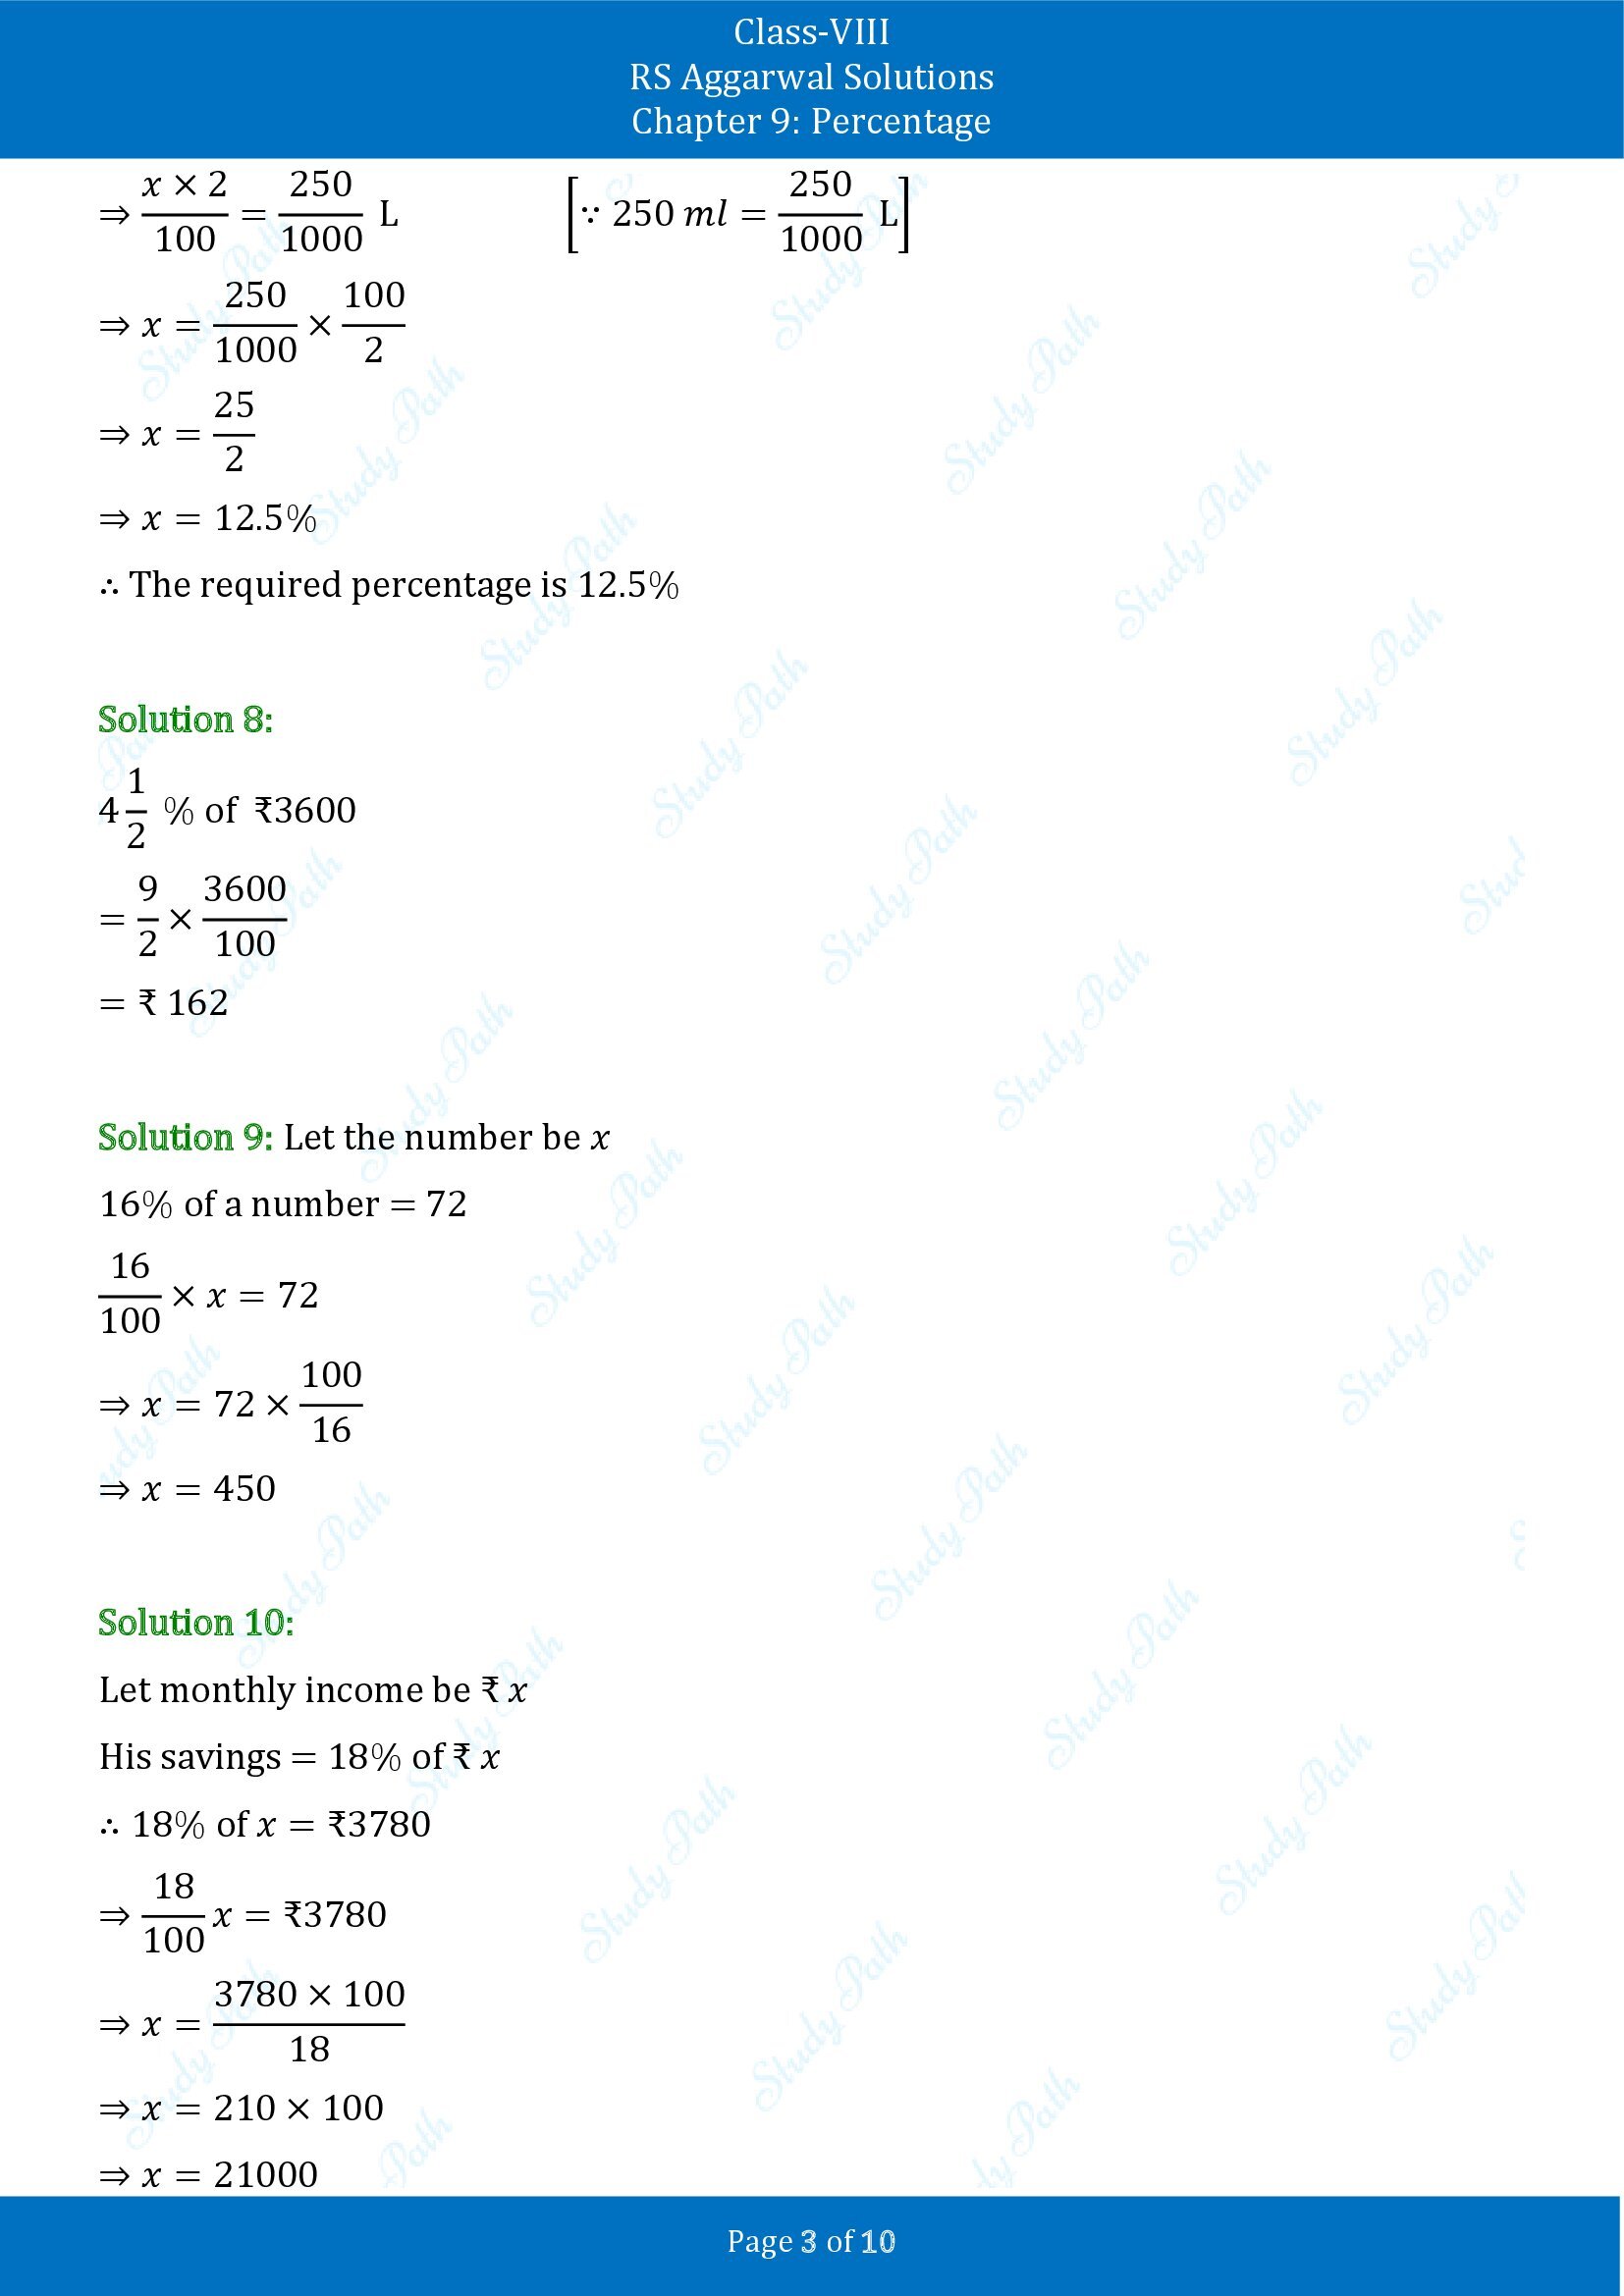 RS Aggarwal Solutions Class 8 Chapter 9 Percentage Exercise 9A 00003